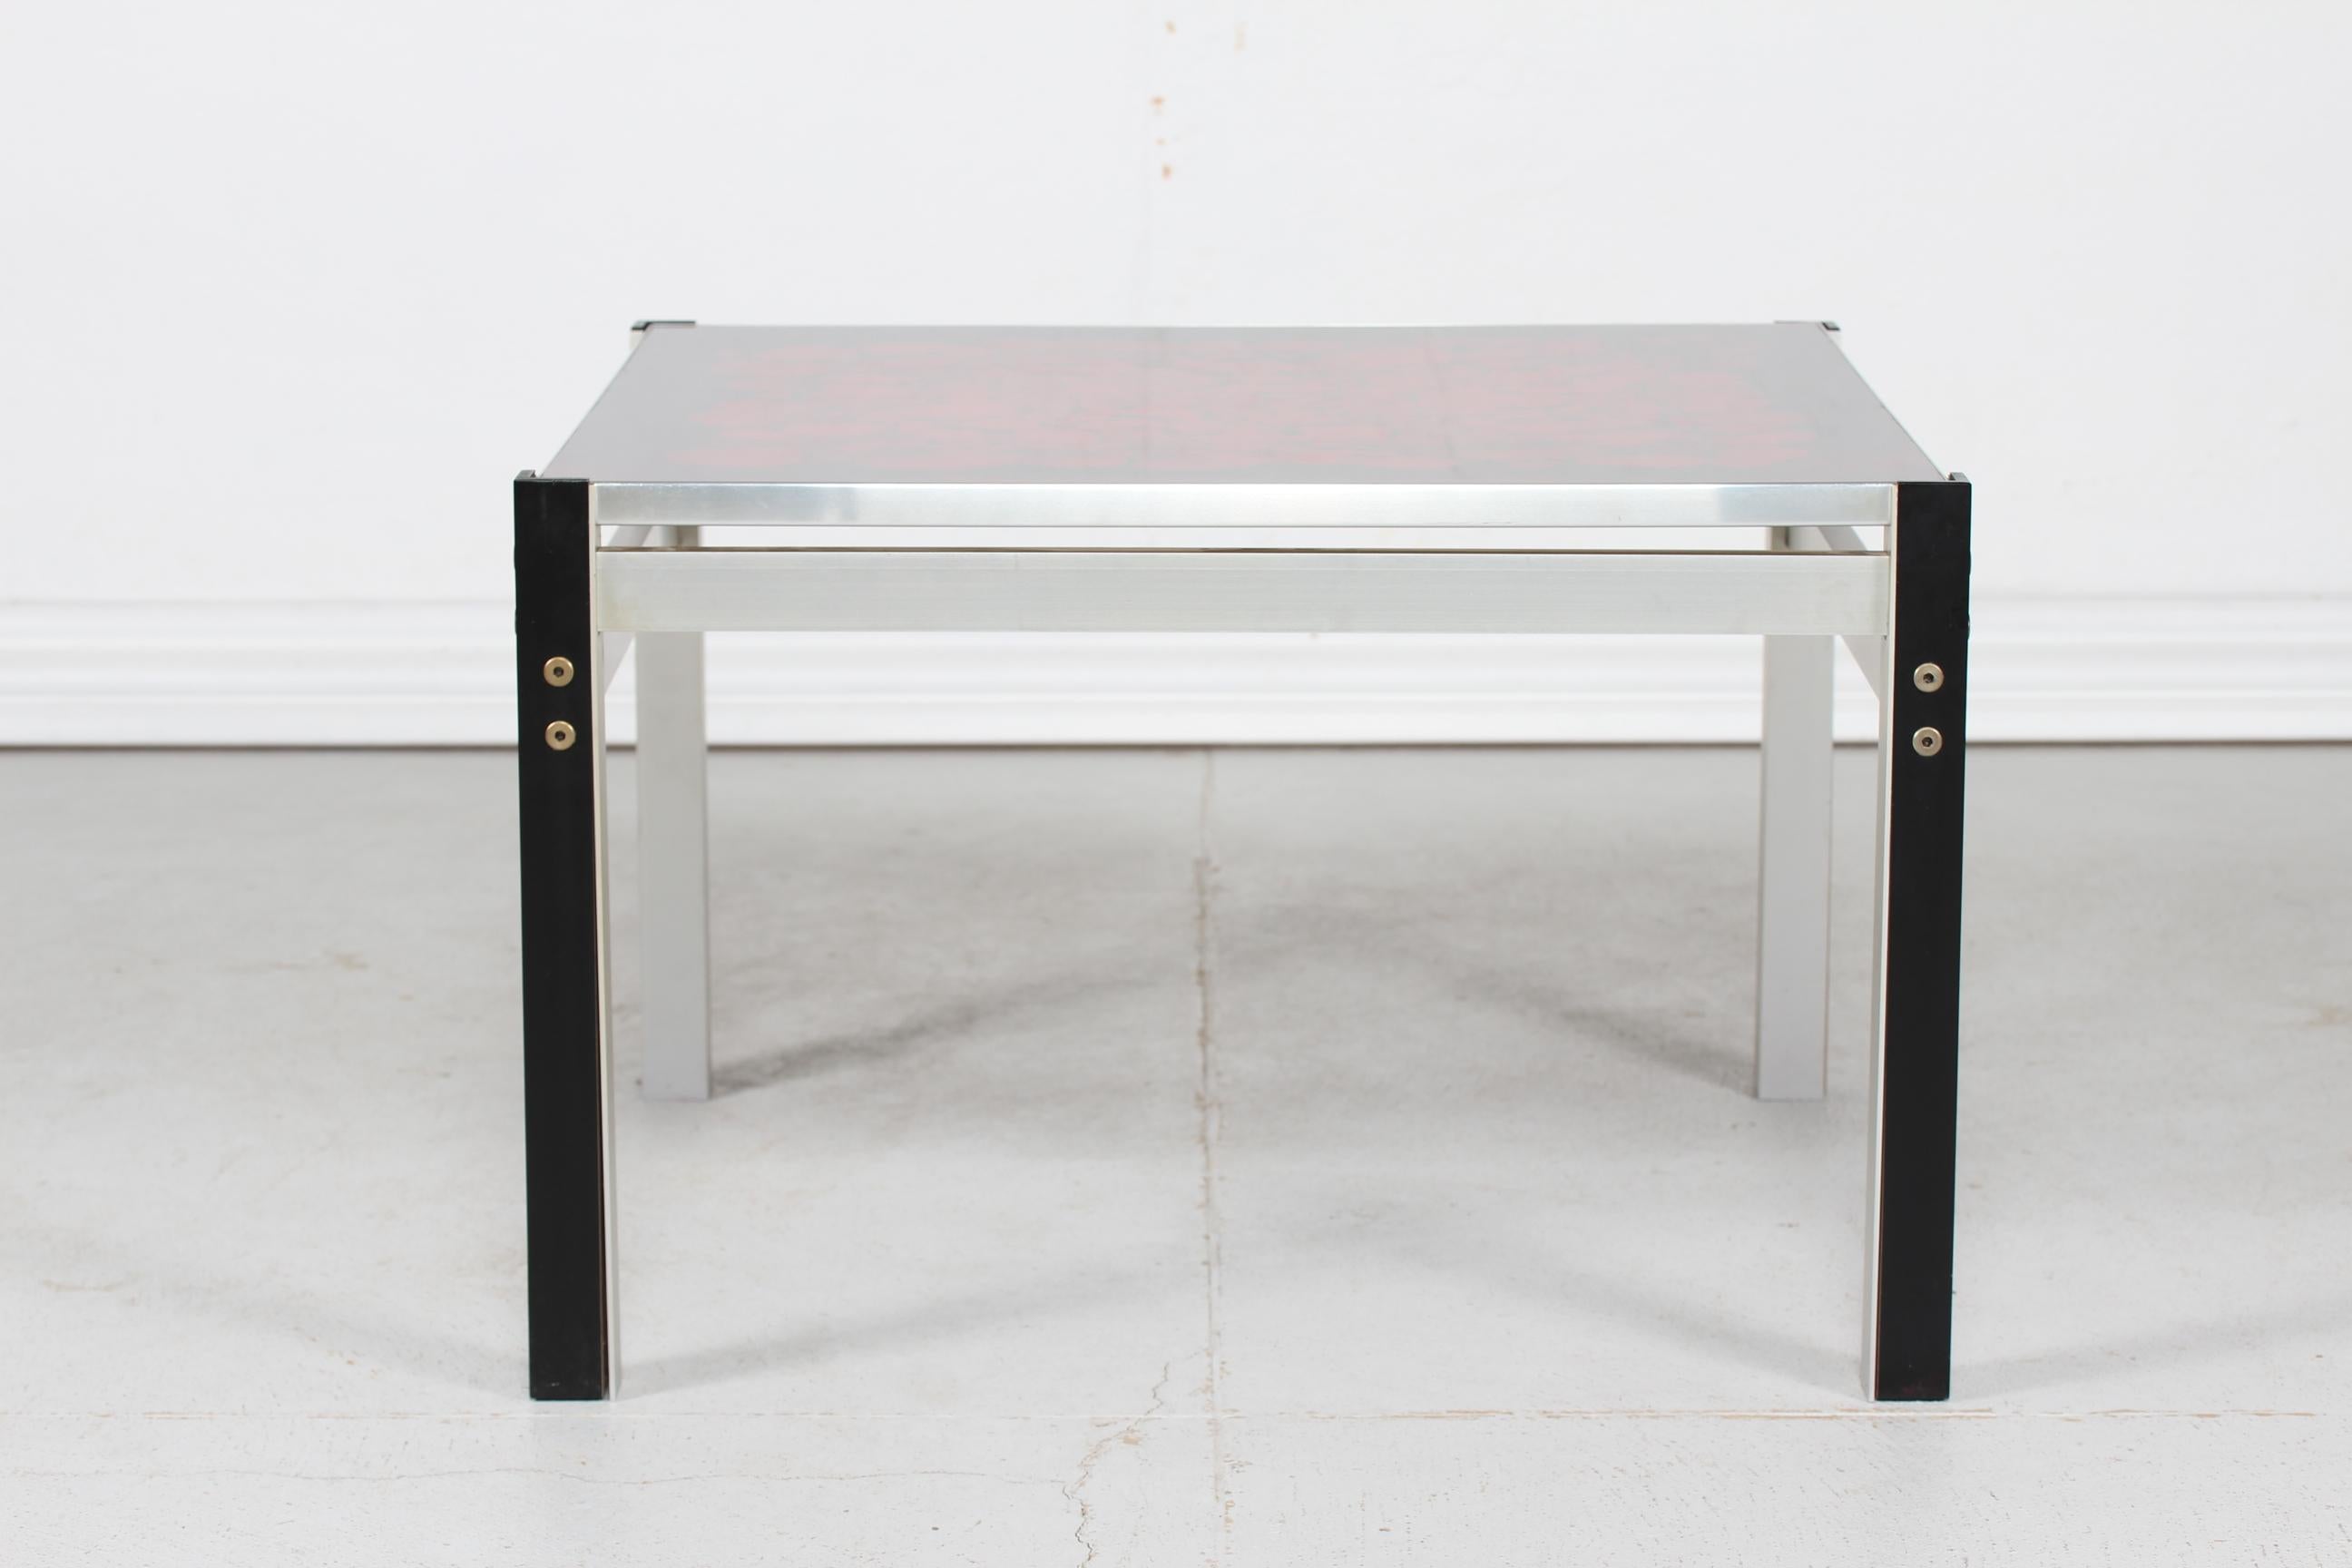 Late 20th Century Danish Modern Square Glass Table with Red Decoration and Aluminium Frame, 1970s